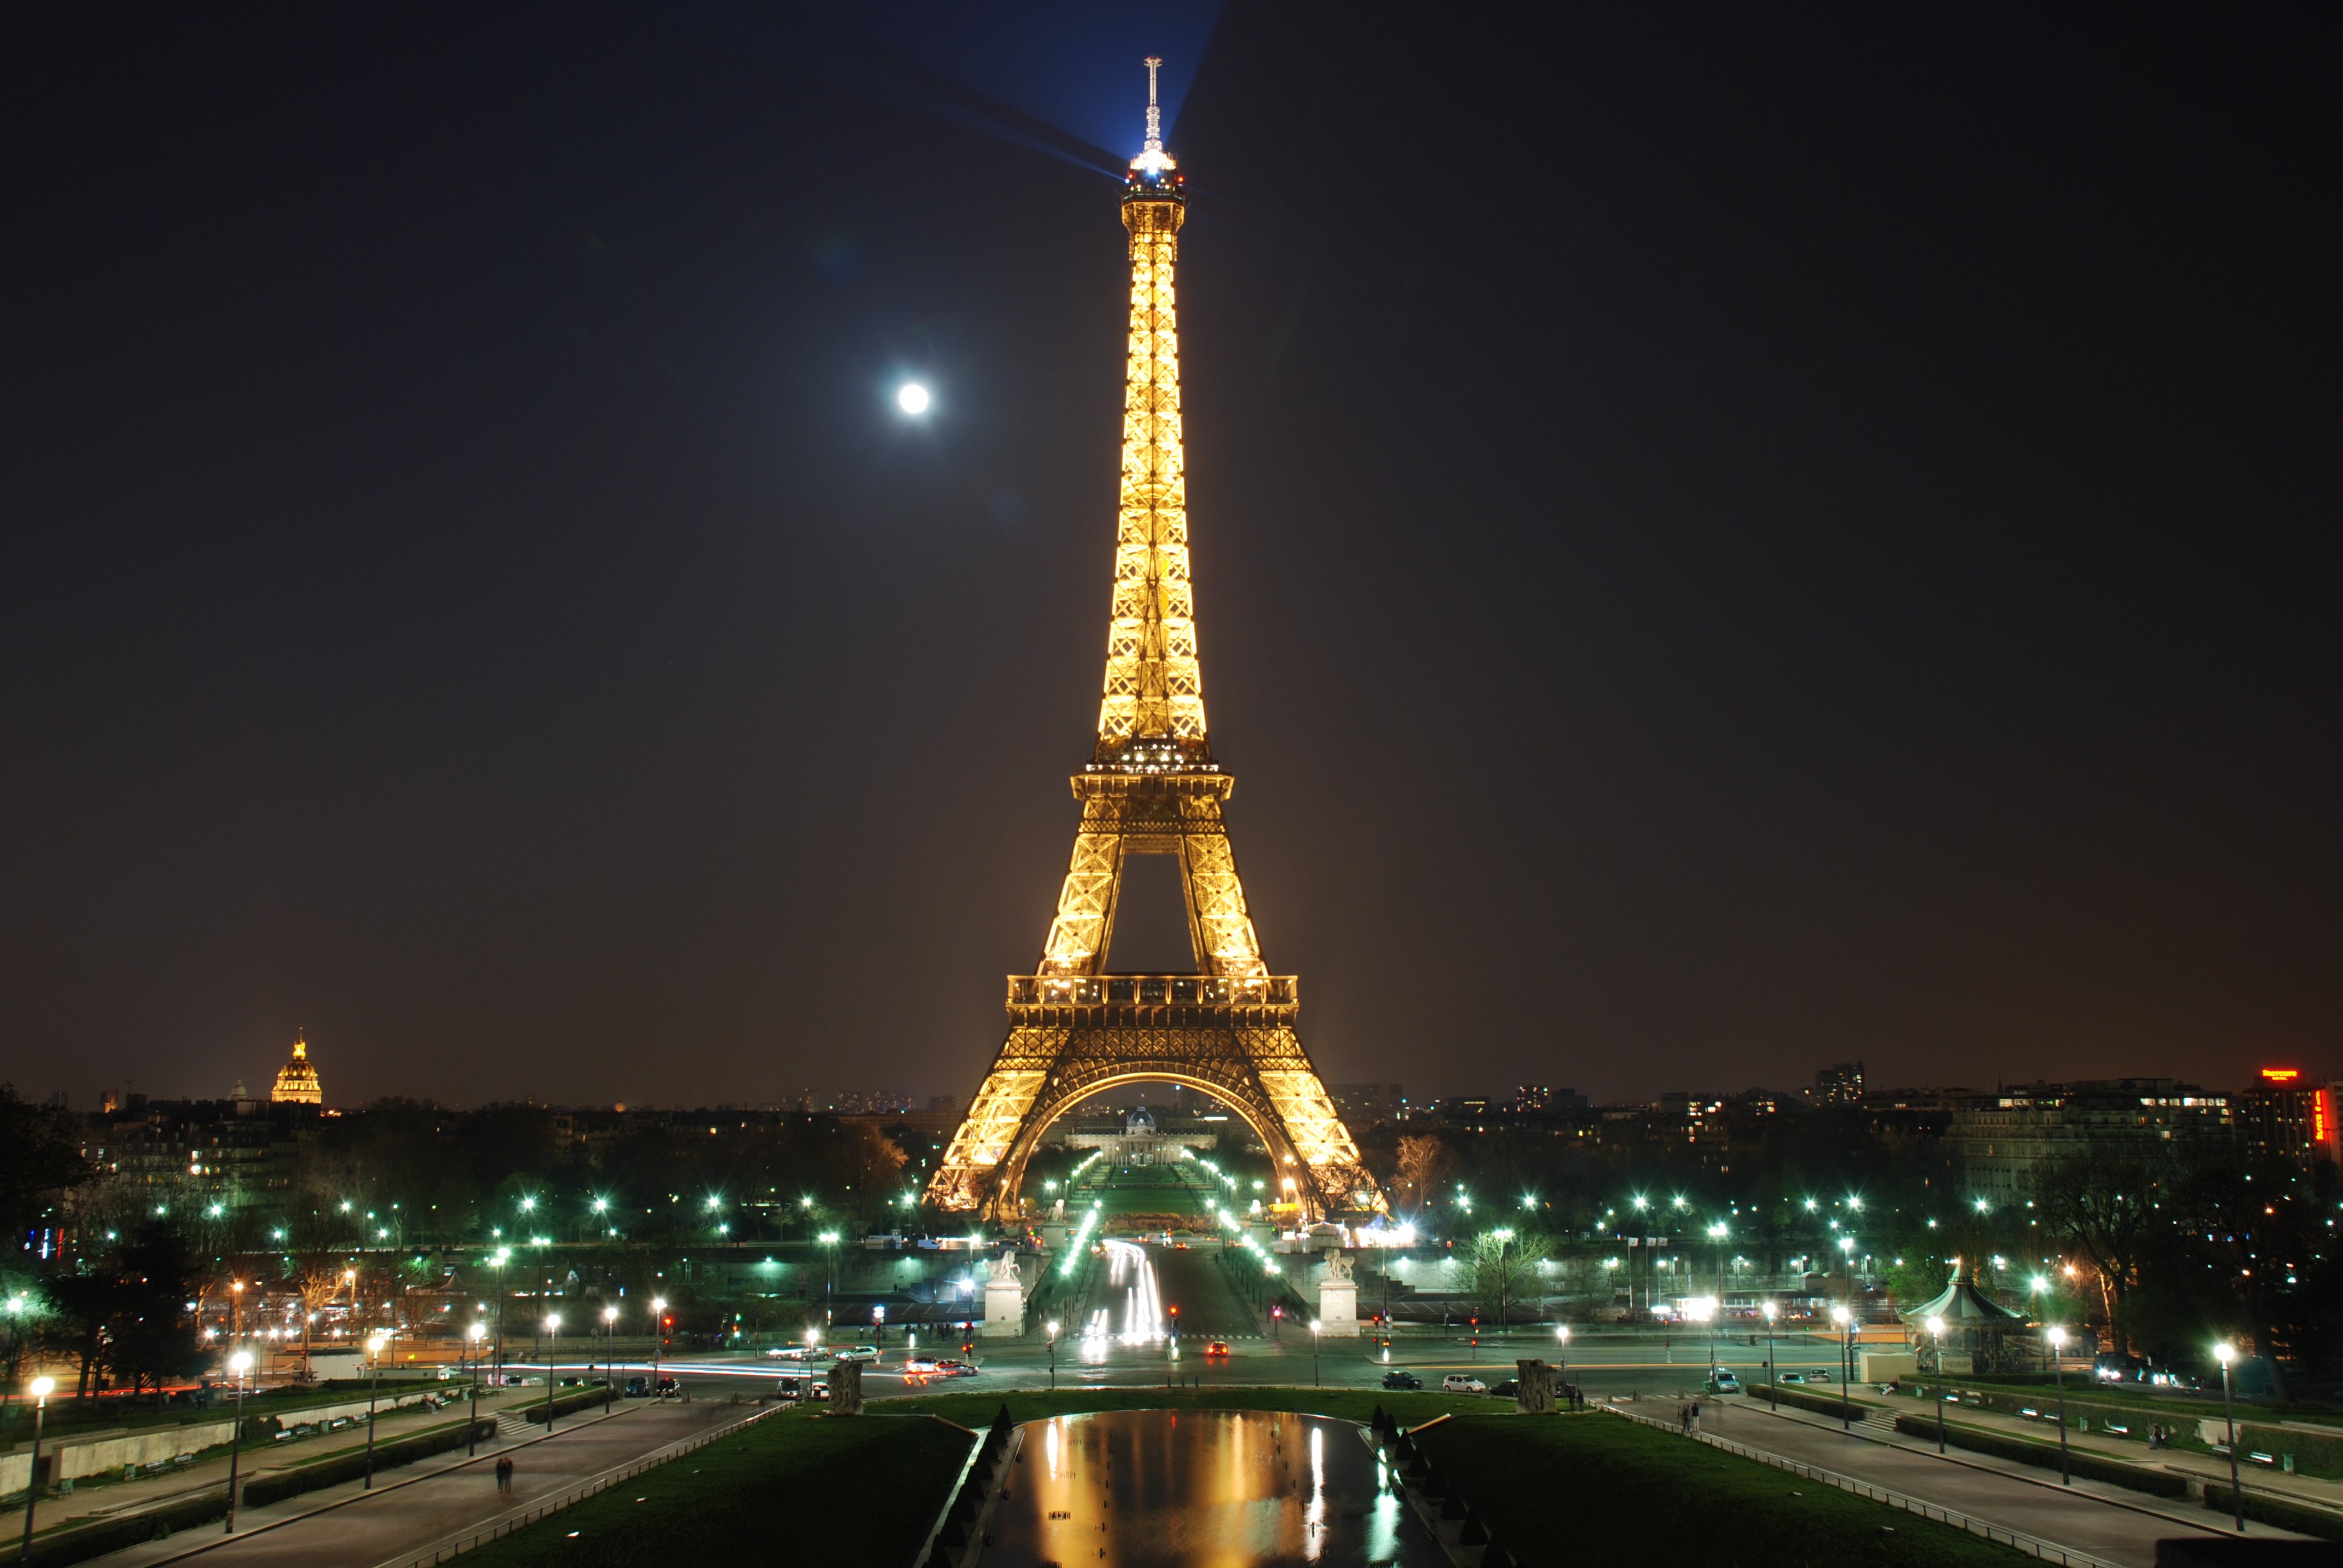 Full view of Eiffel Tower at night